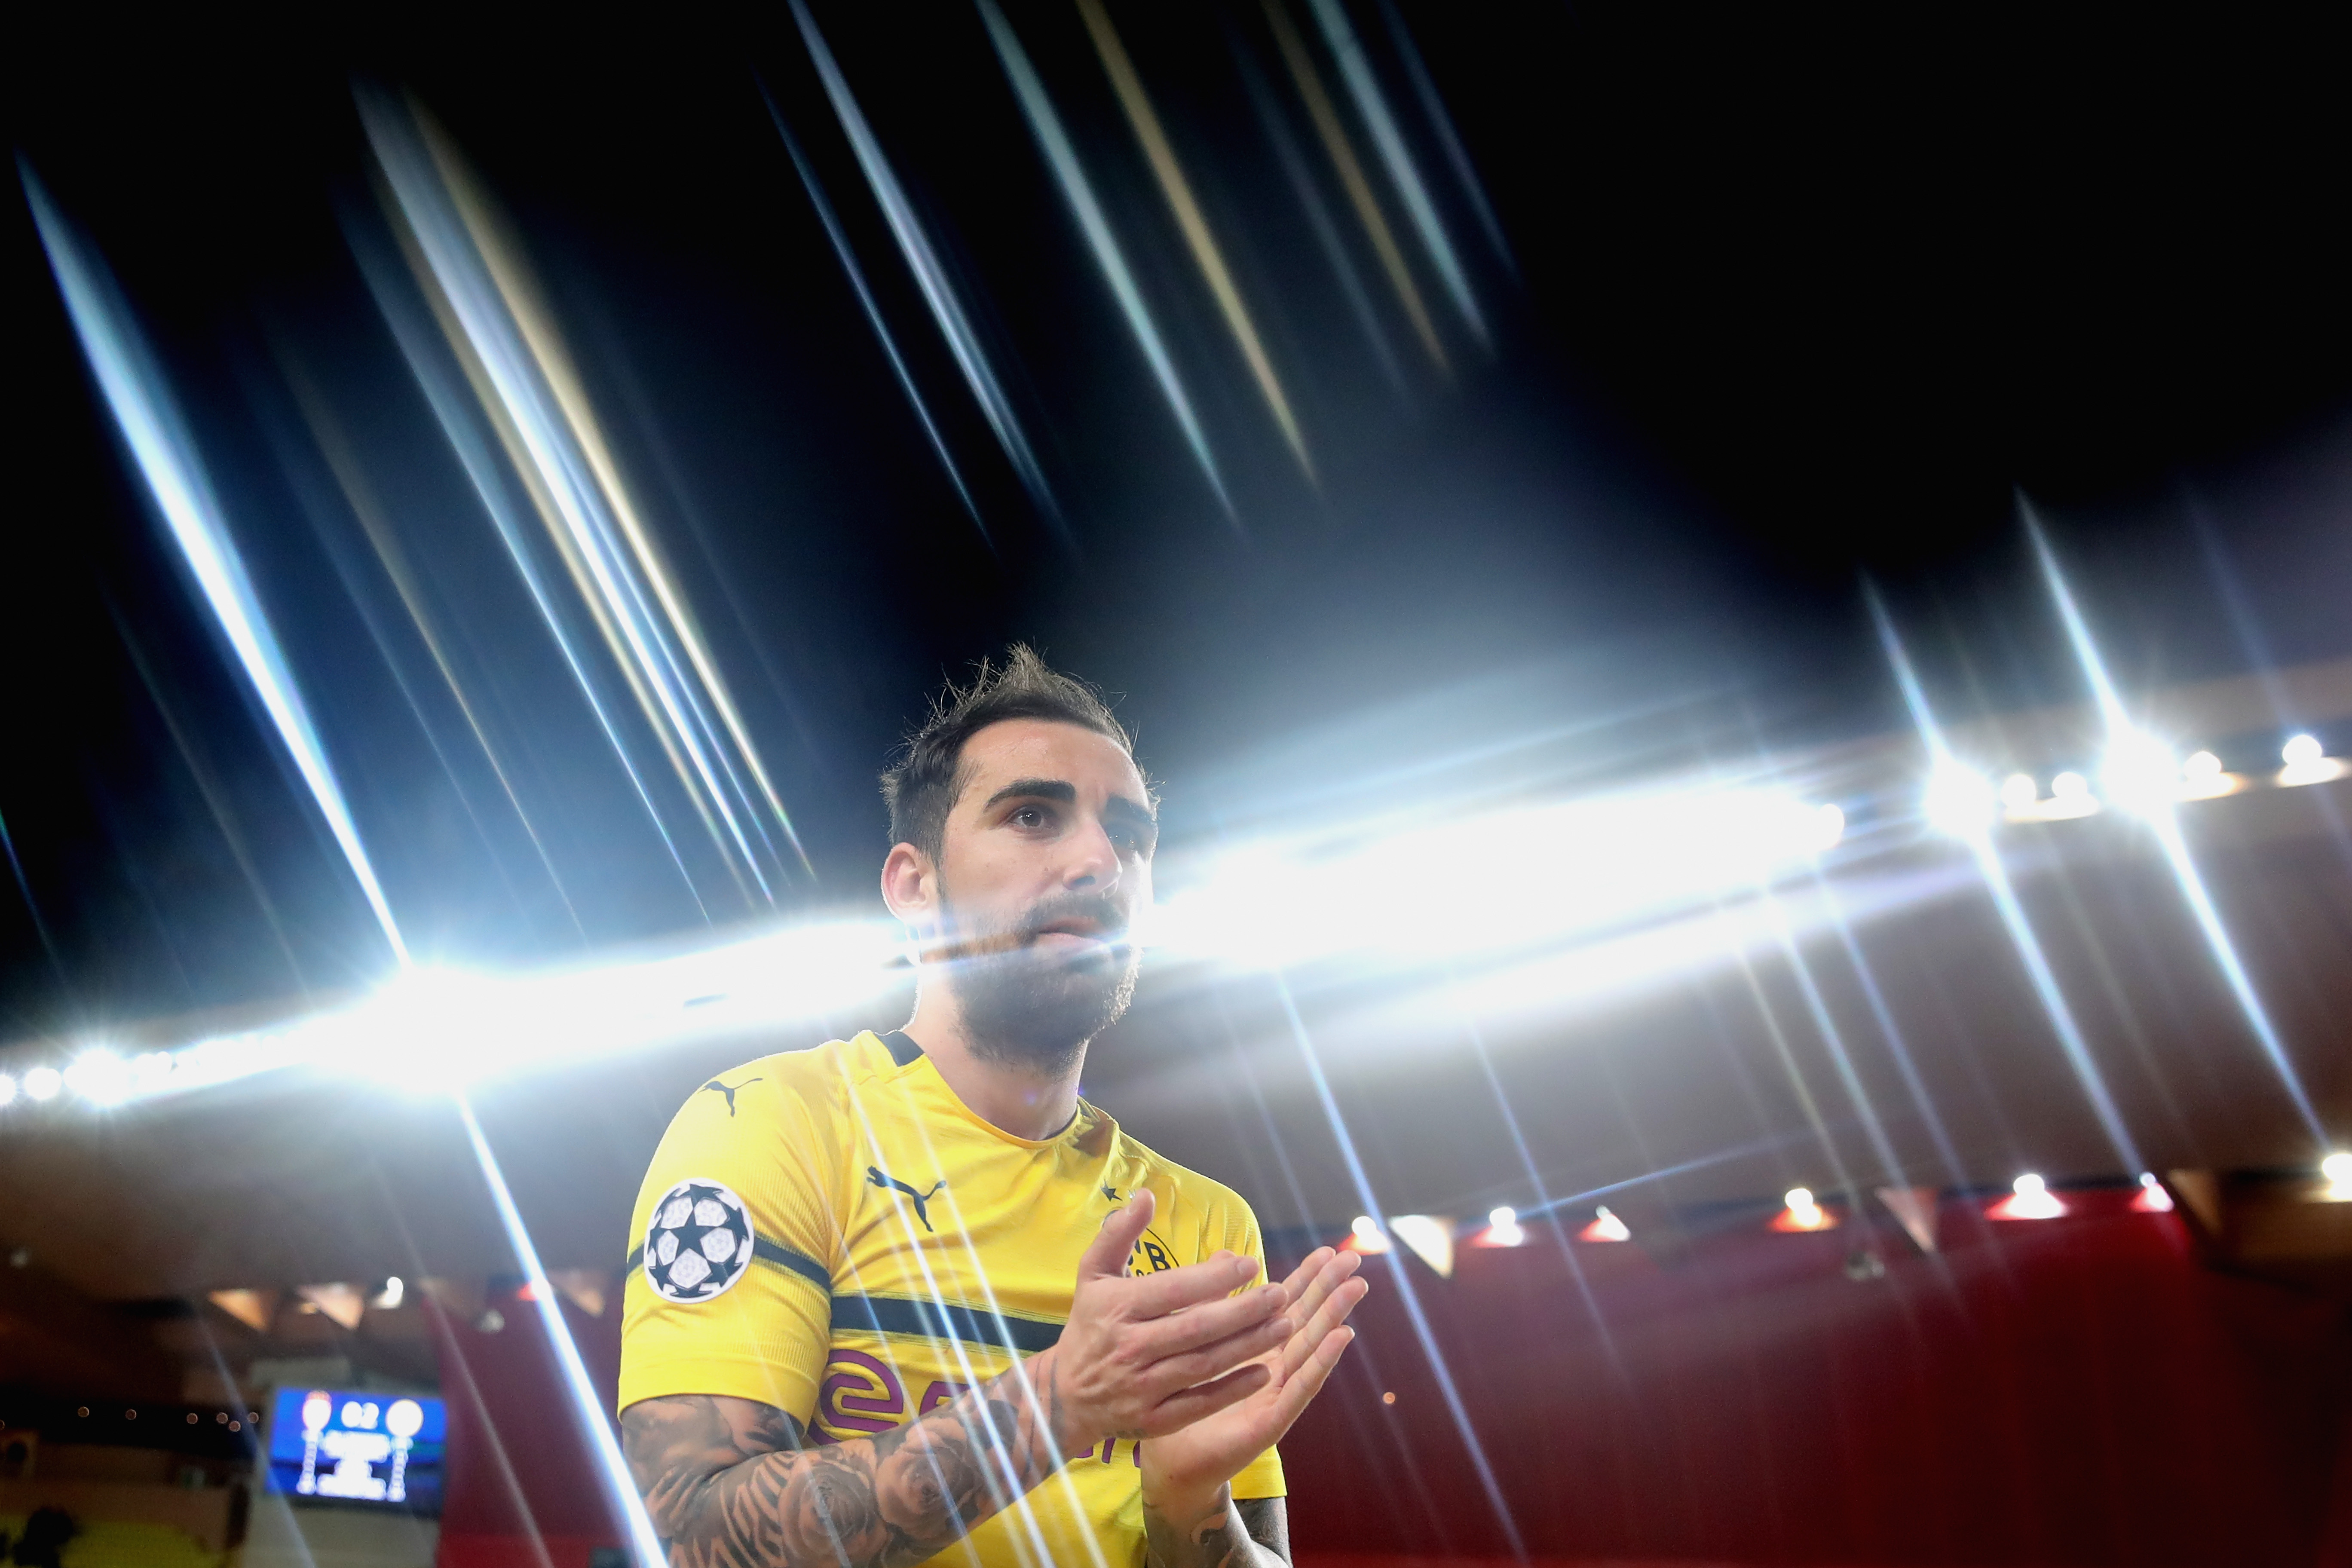 MONACO - DECEMBER 11:  (EDITORS NOTE: STAR EFFECT FILTER USED TO CREATE THIS PICTURE!) Paco Alcacer of Dortmund celebrates victory after winning  the UEFA Champions League Group A match between AS Monaco and Borussia Dortmund at Stade Louis II on December 11, 2018 in Monaco, Monaco.  (Photo by Alexander Hassenstein/Bongarts/Getty Images)